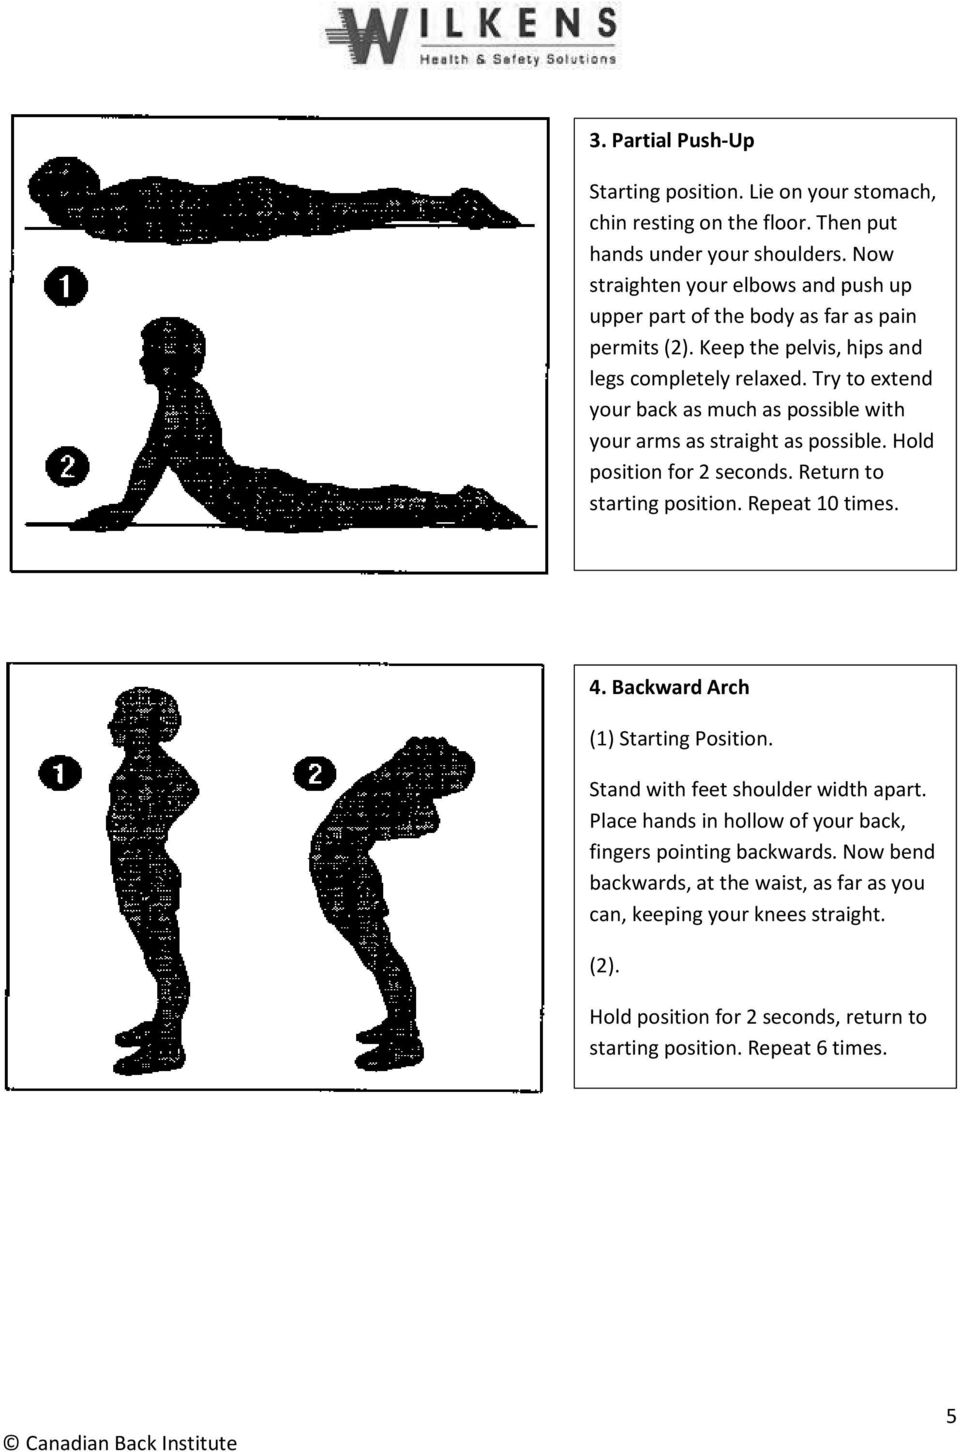 Try to extend your back as much as possible with your arms as straight as possible. Hold position for 2 seconds. Return to starting position. Repeat 10 times. 4.